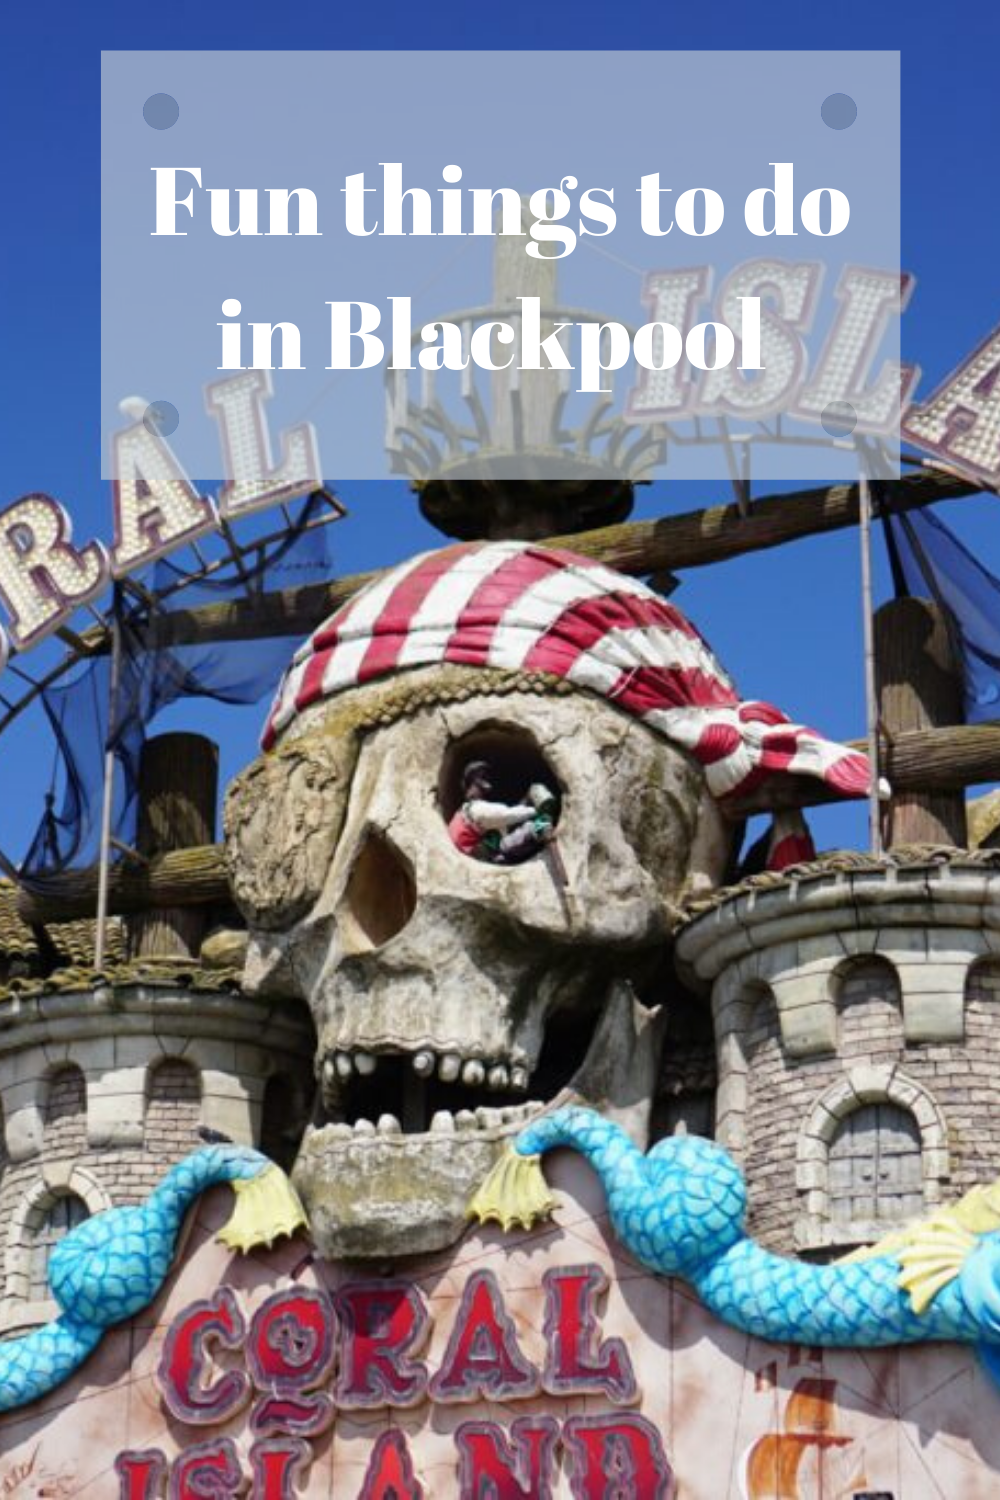 Planning a trip to Blackpool? Read this post